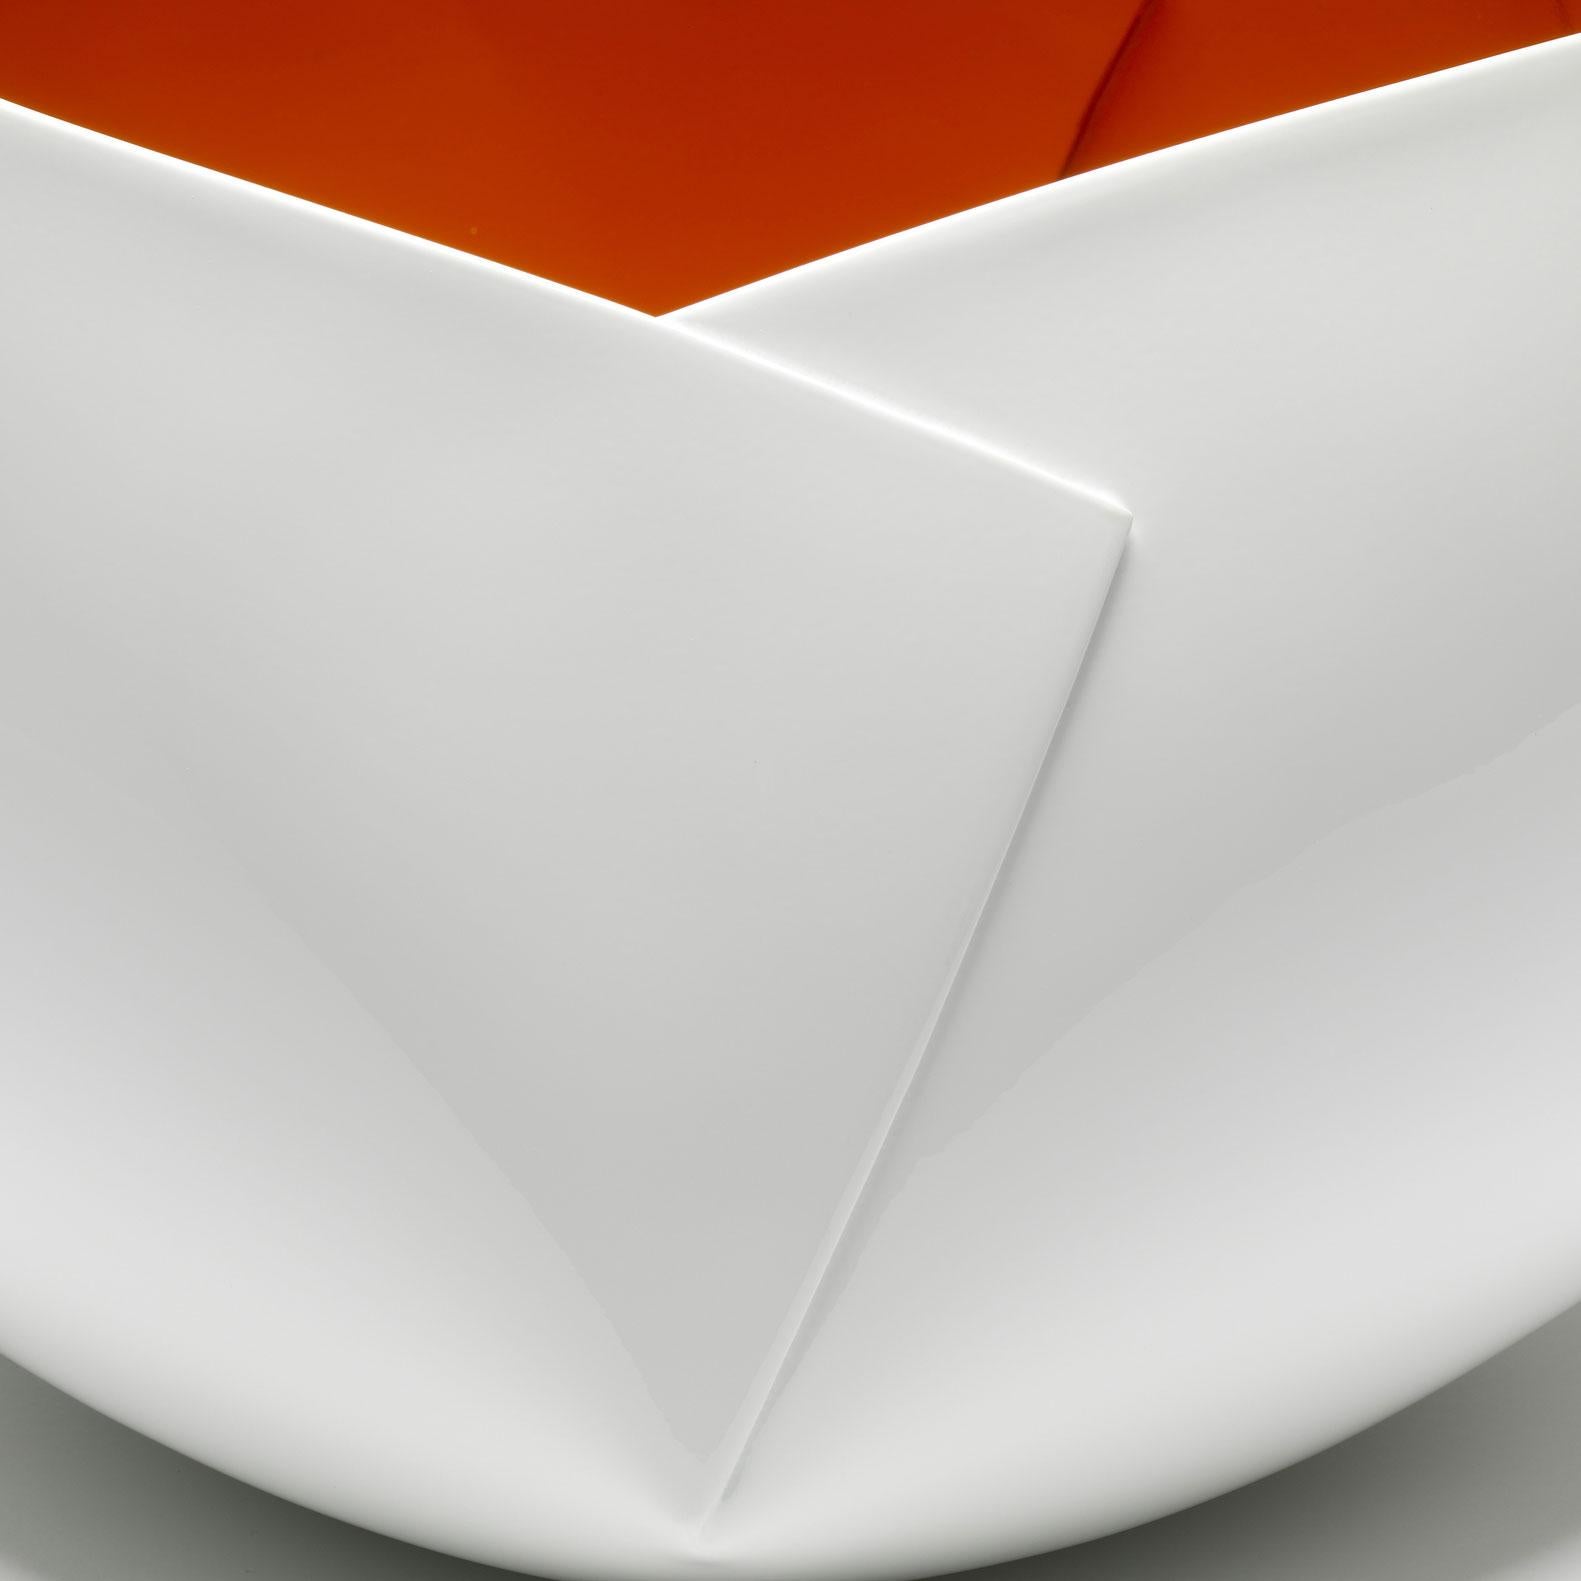 Hand-Crafted Orange and White Origami Vessel by Ann Van Hoey